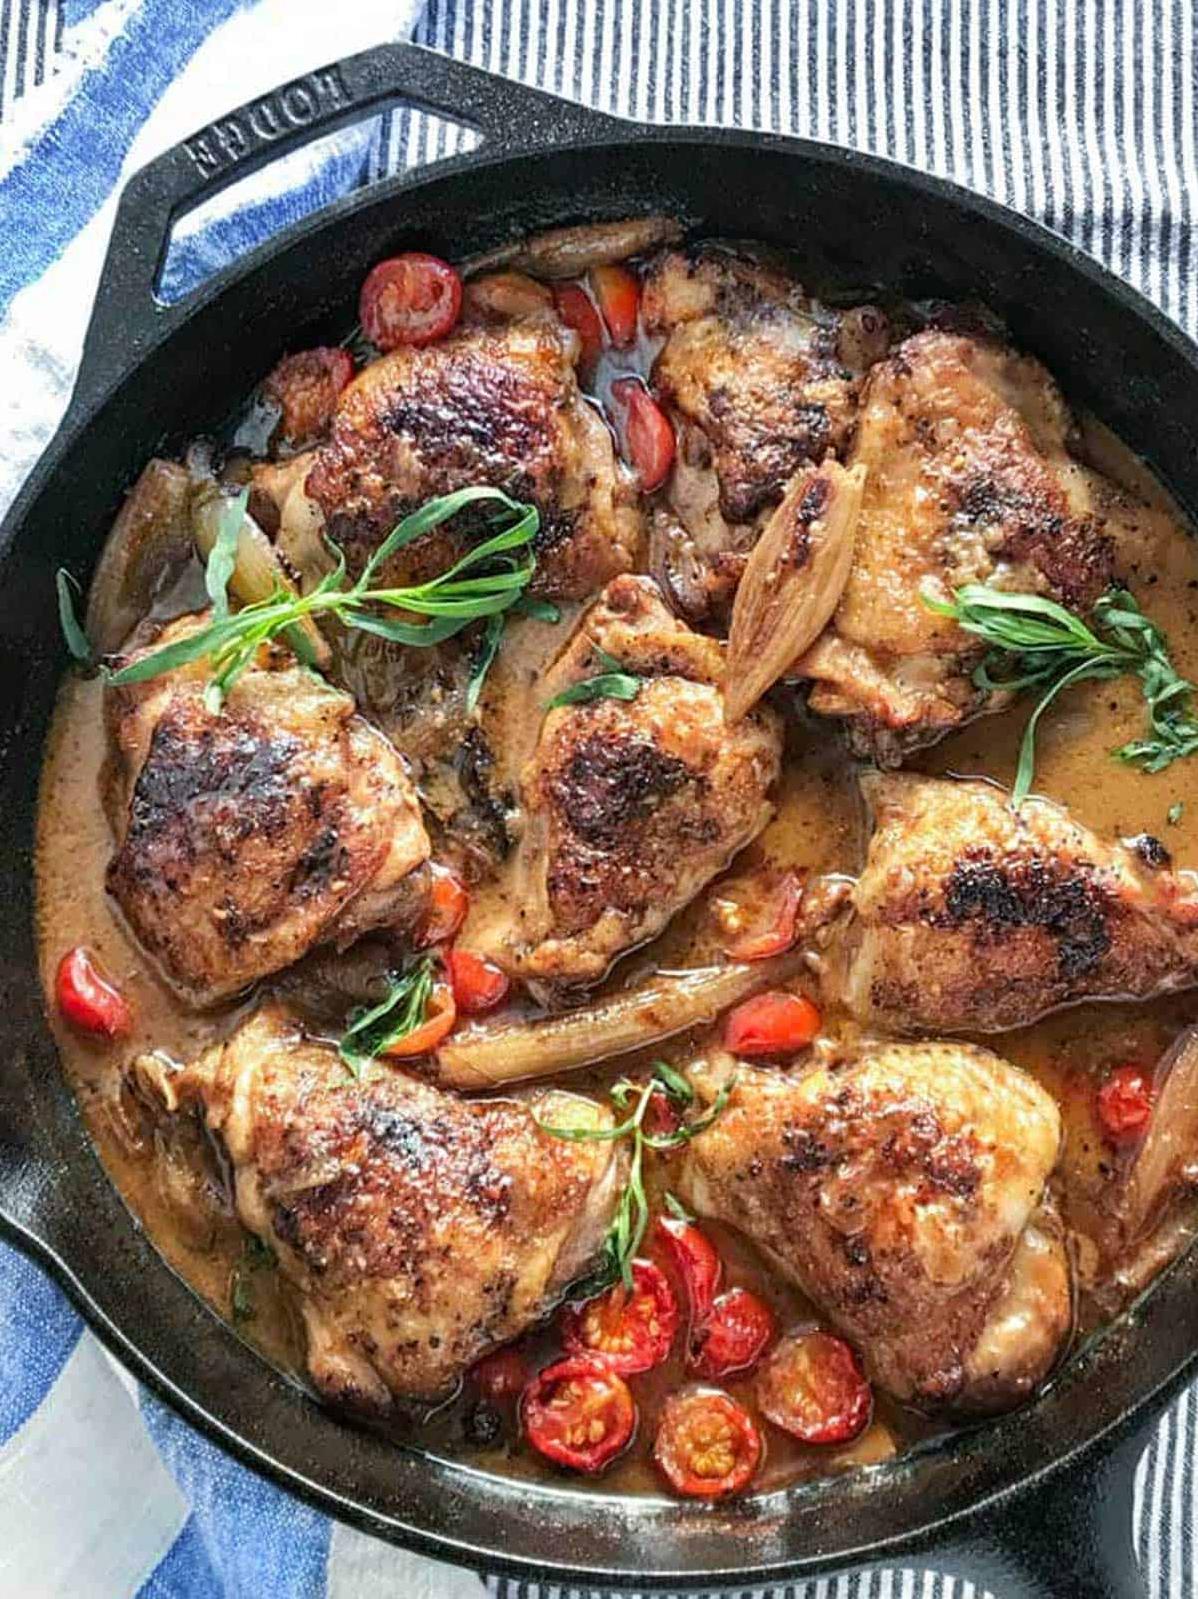  Aromatic white wine blends perfectly with the flavors of the chicken and shallots.